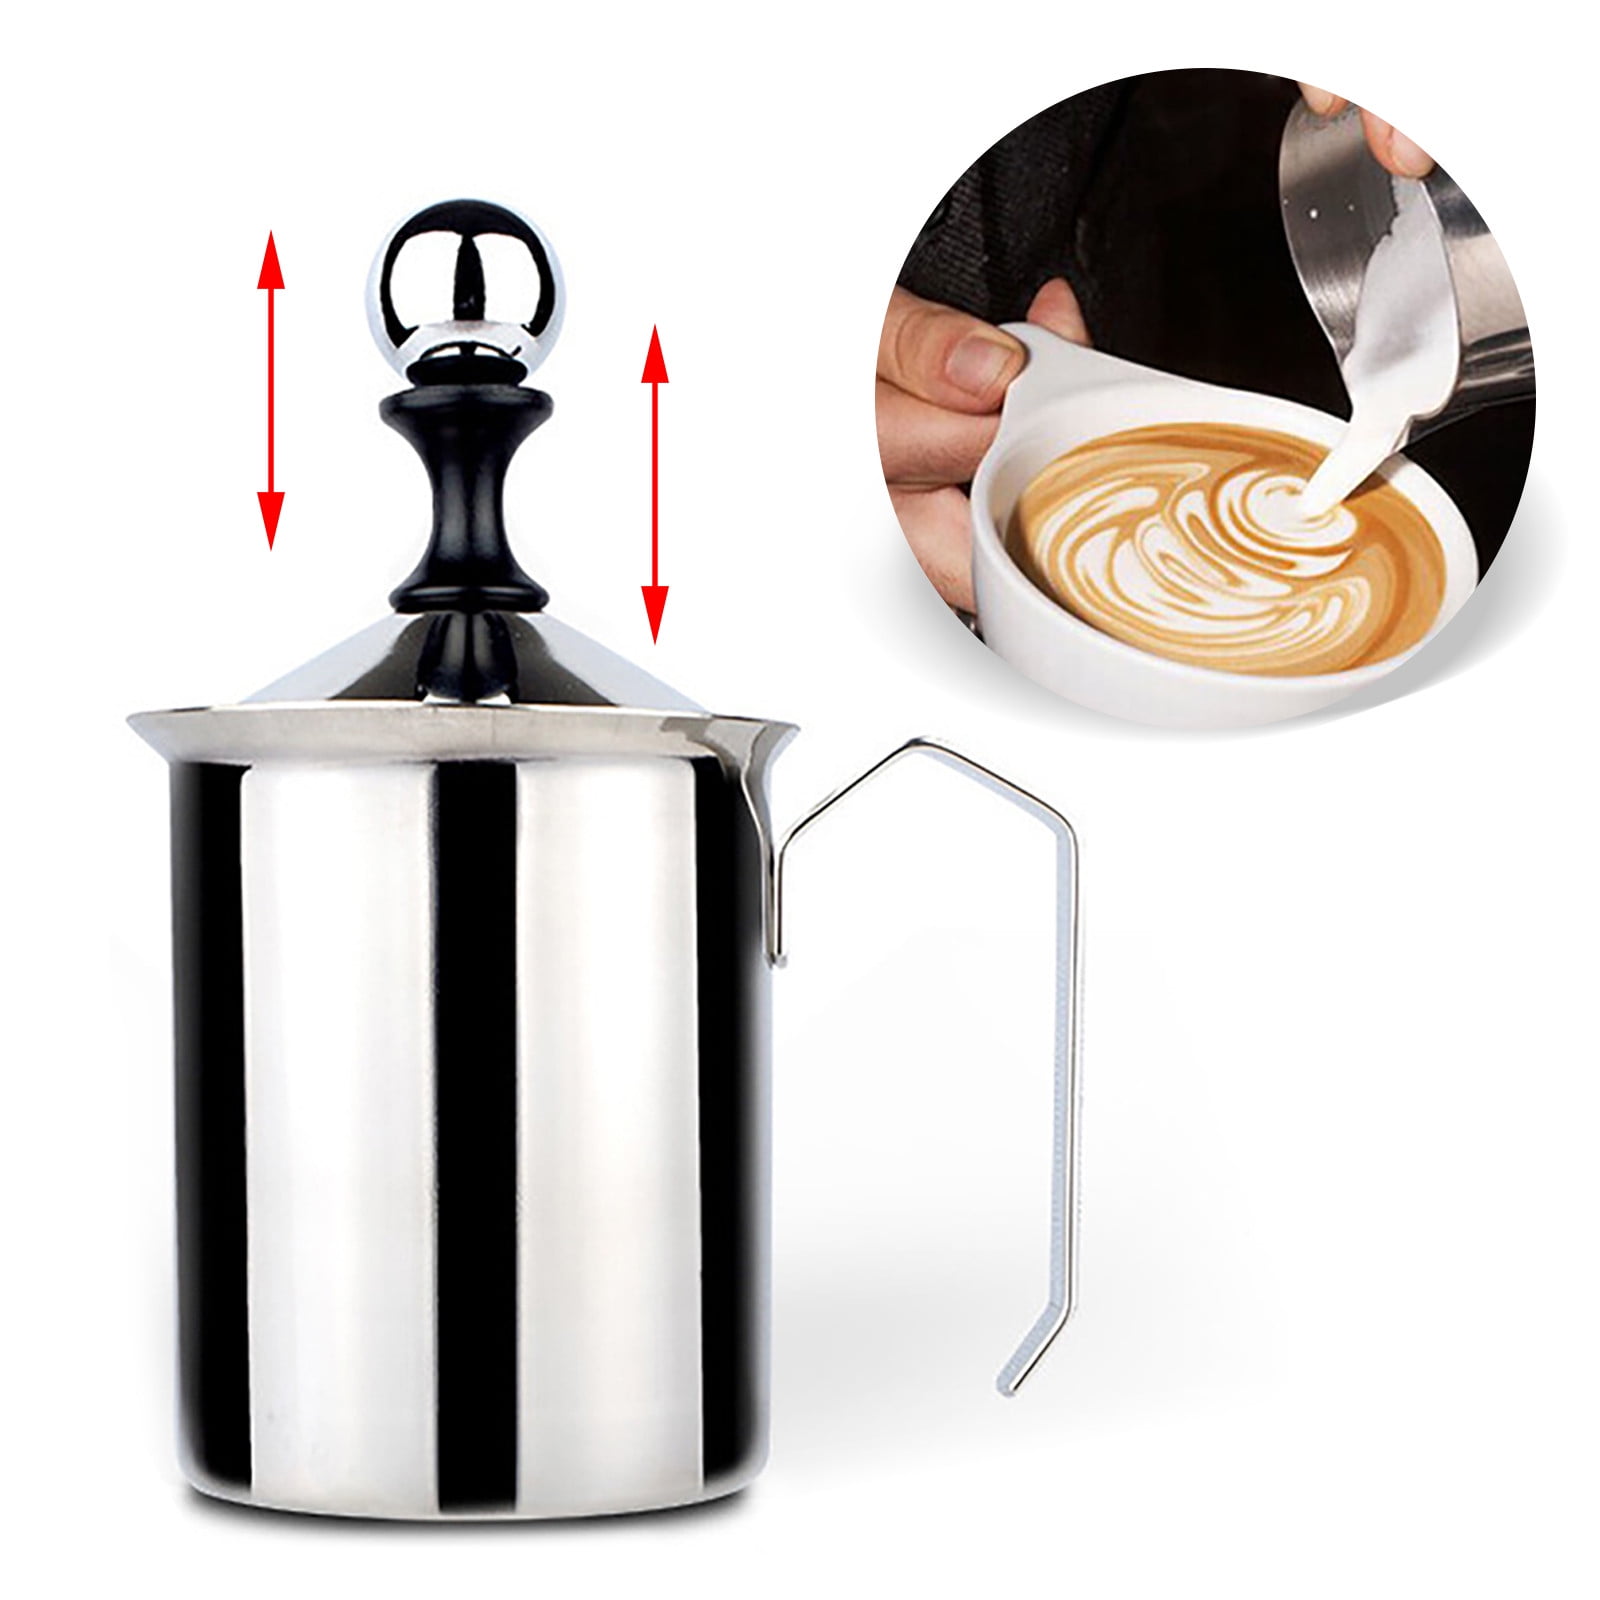 Eboxer Milk Frother, Stainless Steel Manual Milk Foamer, Handheld Coffee  Milk Frothing Pitchers, Manual Operated, with Double froth screen, for